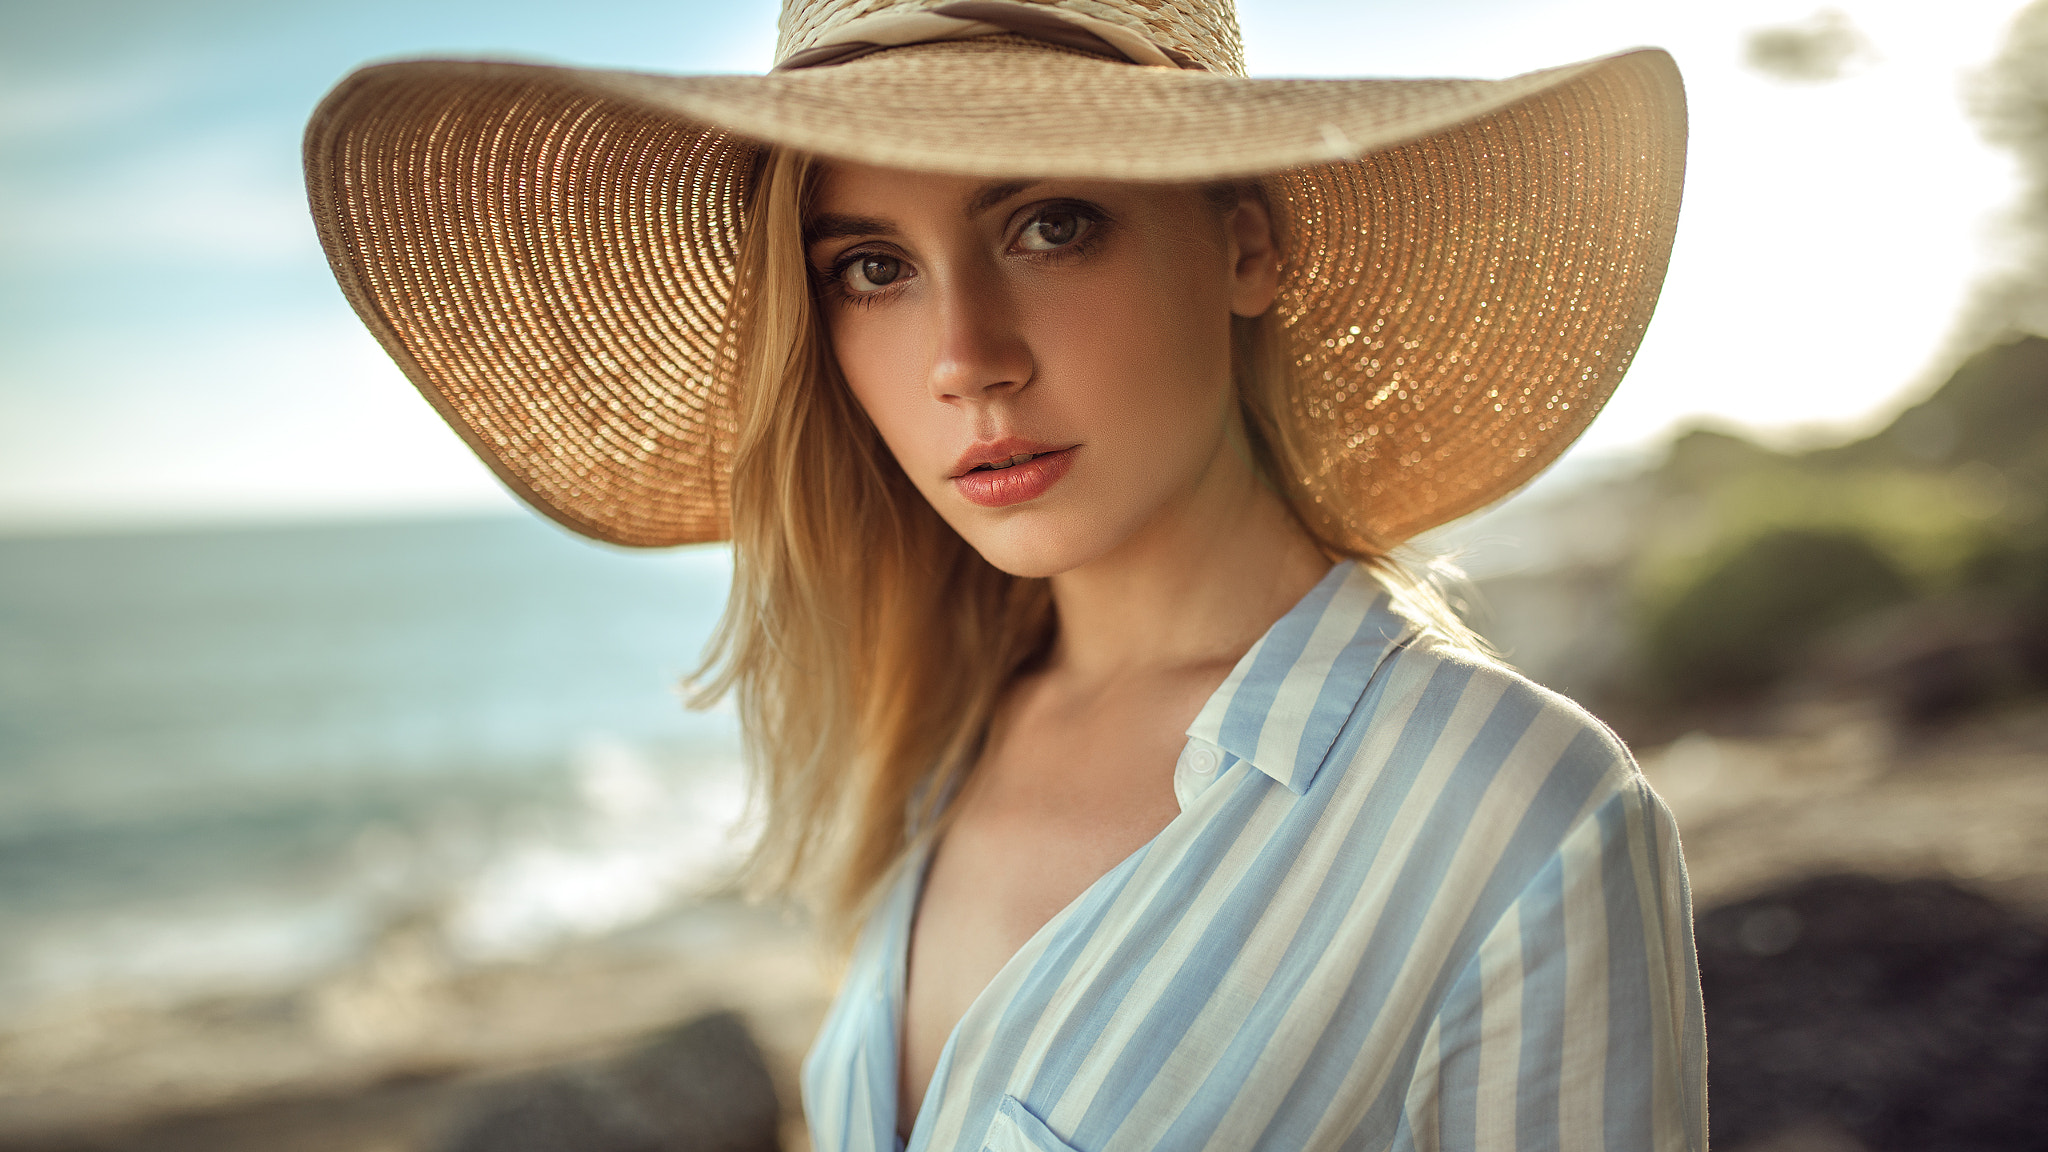 girl with hat by johnpdunnigan #Models #Fashion # 